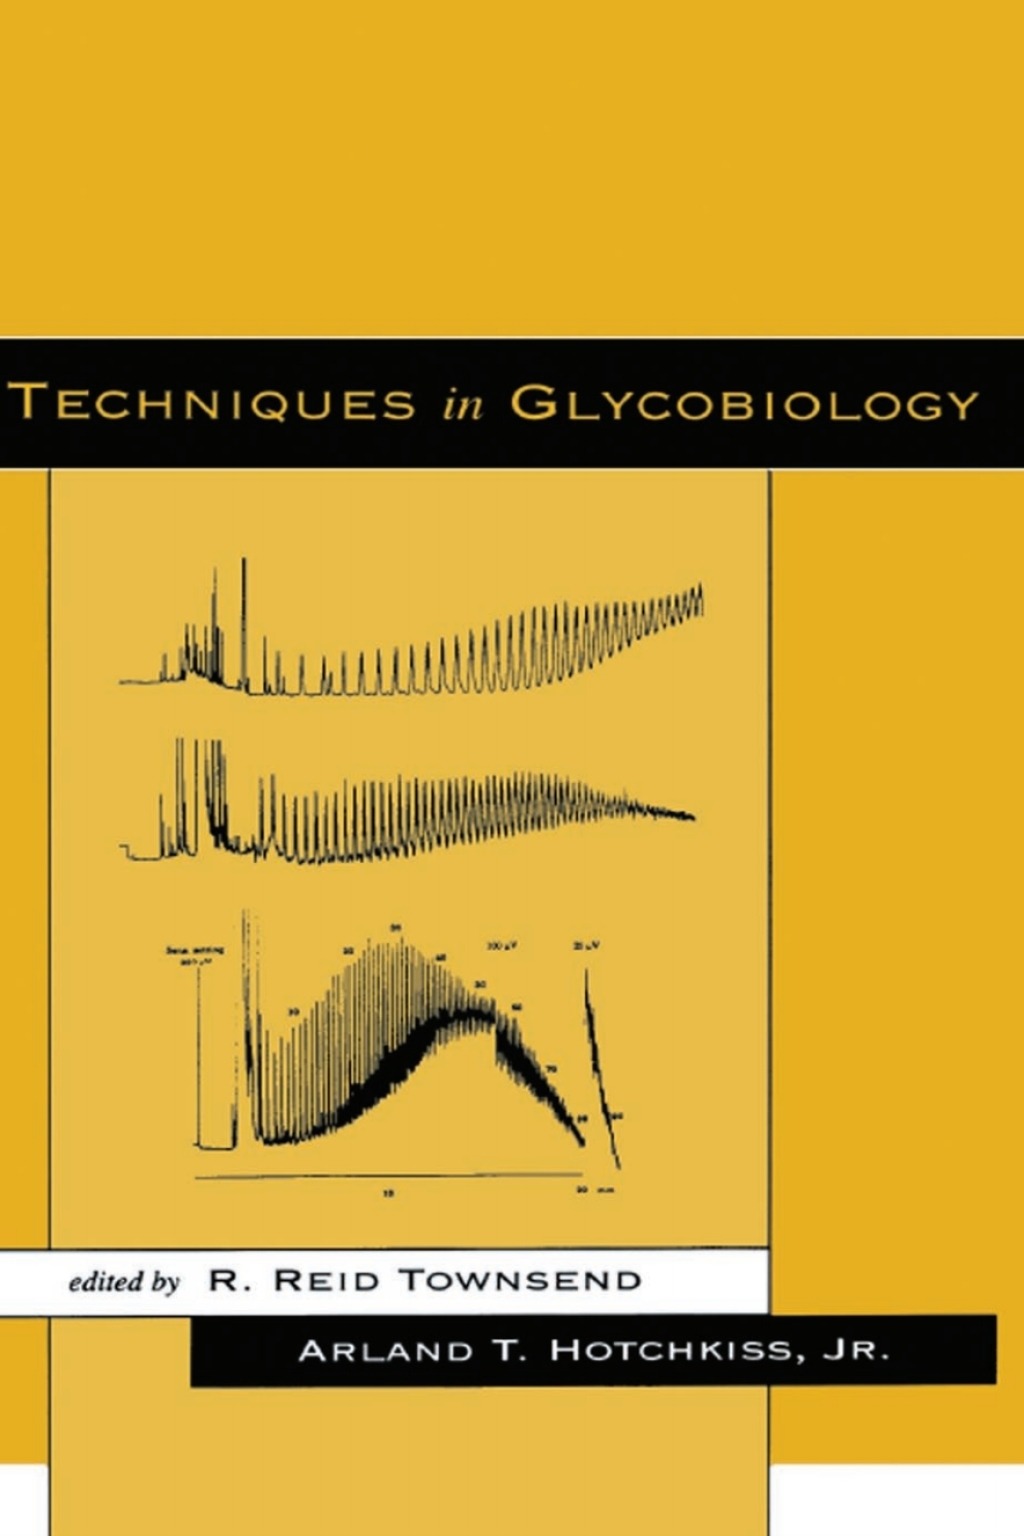 ISBN 9780824798222 product image for Techniques in Glycobiology - 1st Edition (eBook Rental) | upcitemdb.com